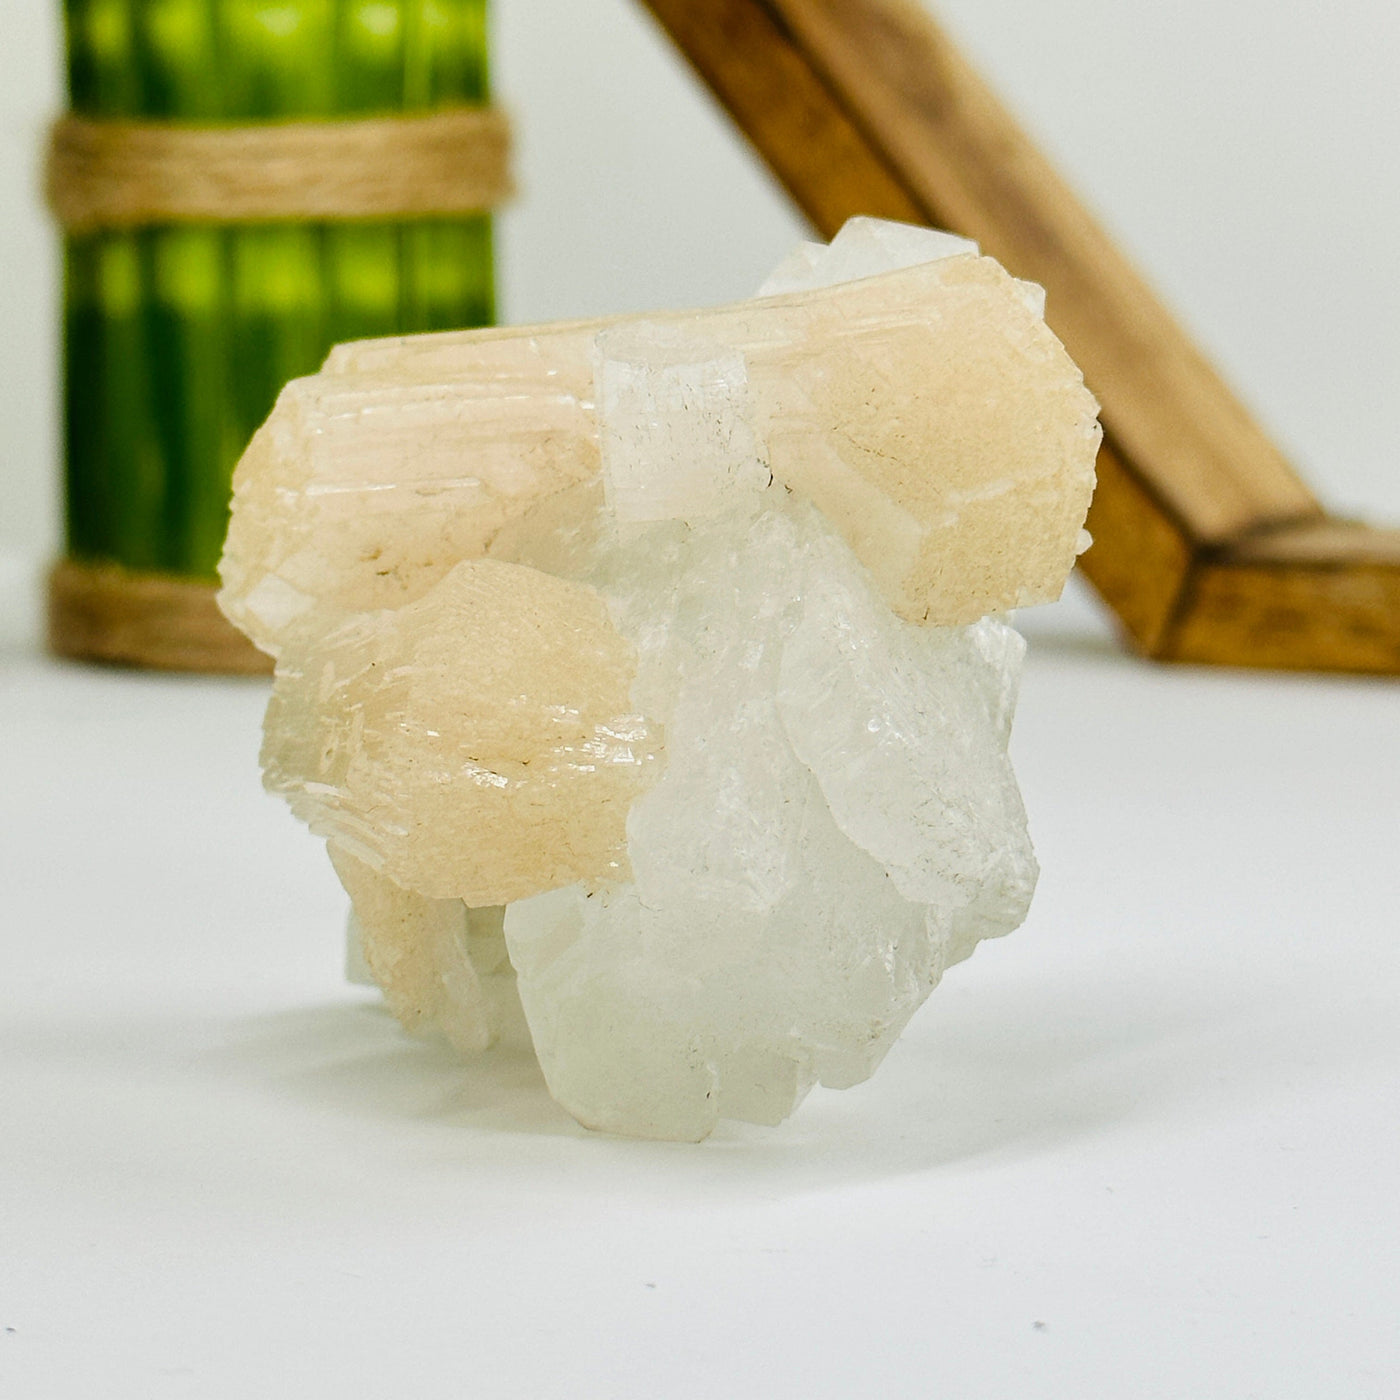 apophyllite with calcite formation with decorations in the background